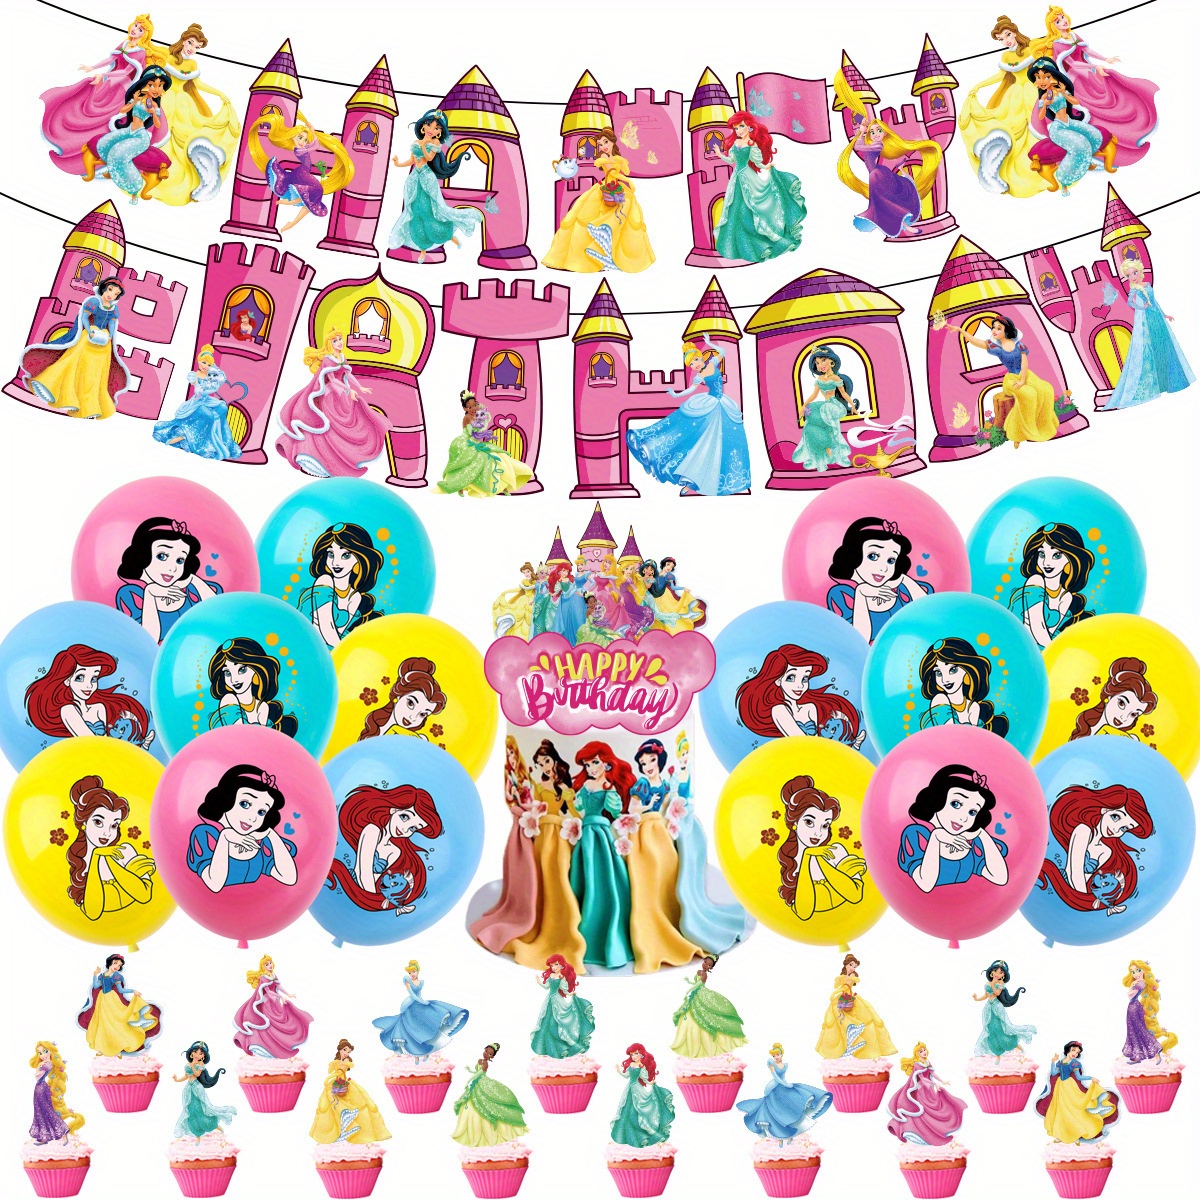 

Disney Princess Themed Birthday Party Decoration Supplies Set With Banner, Latex Balloons, Large & Small Cake Toppers, Princess Figurines - Ume Brand